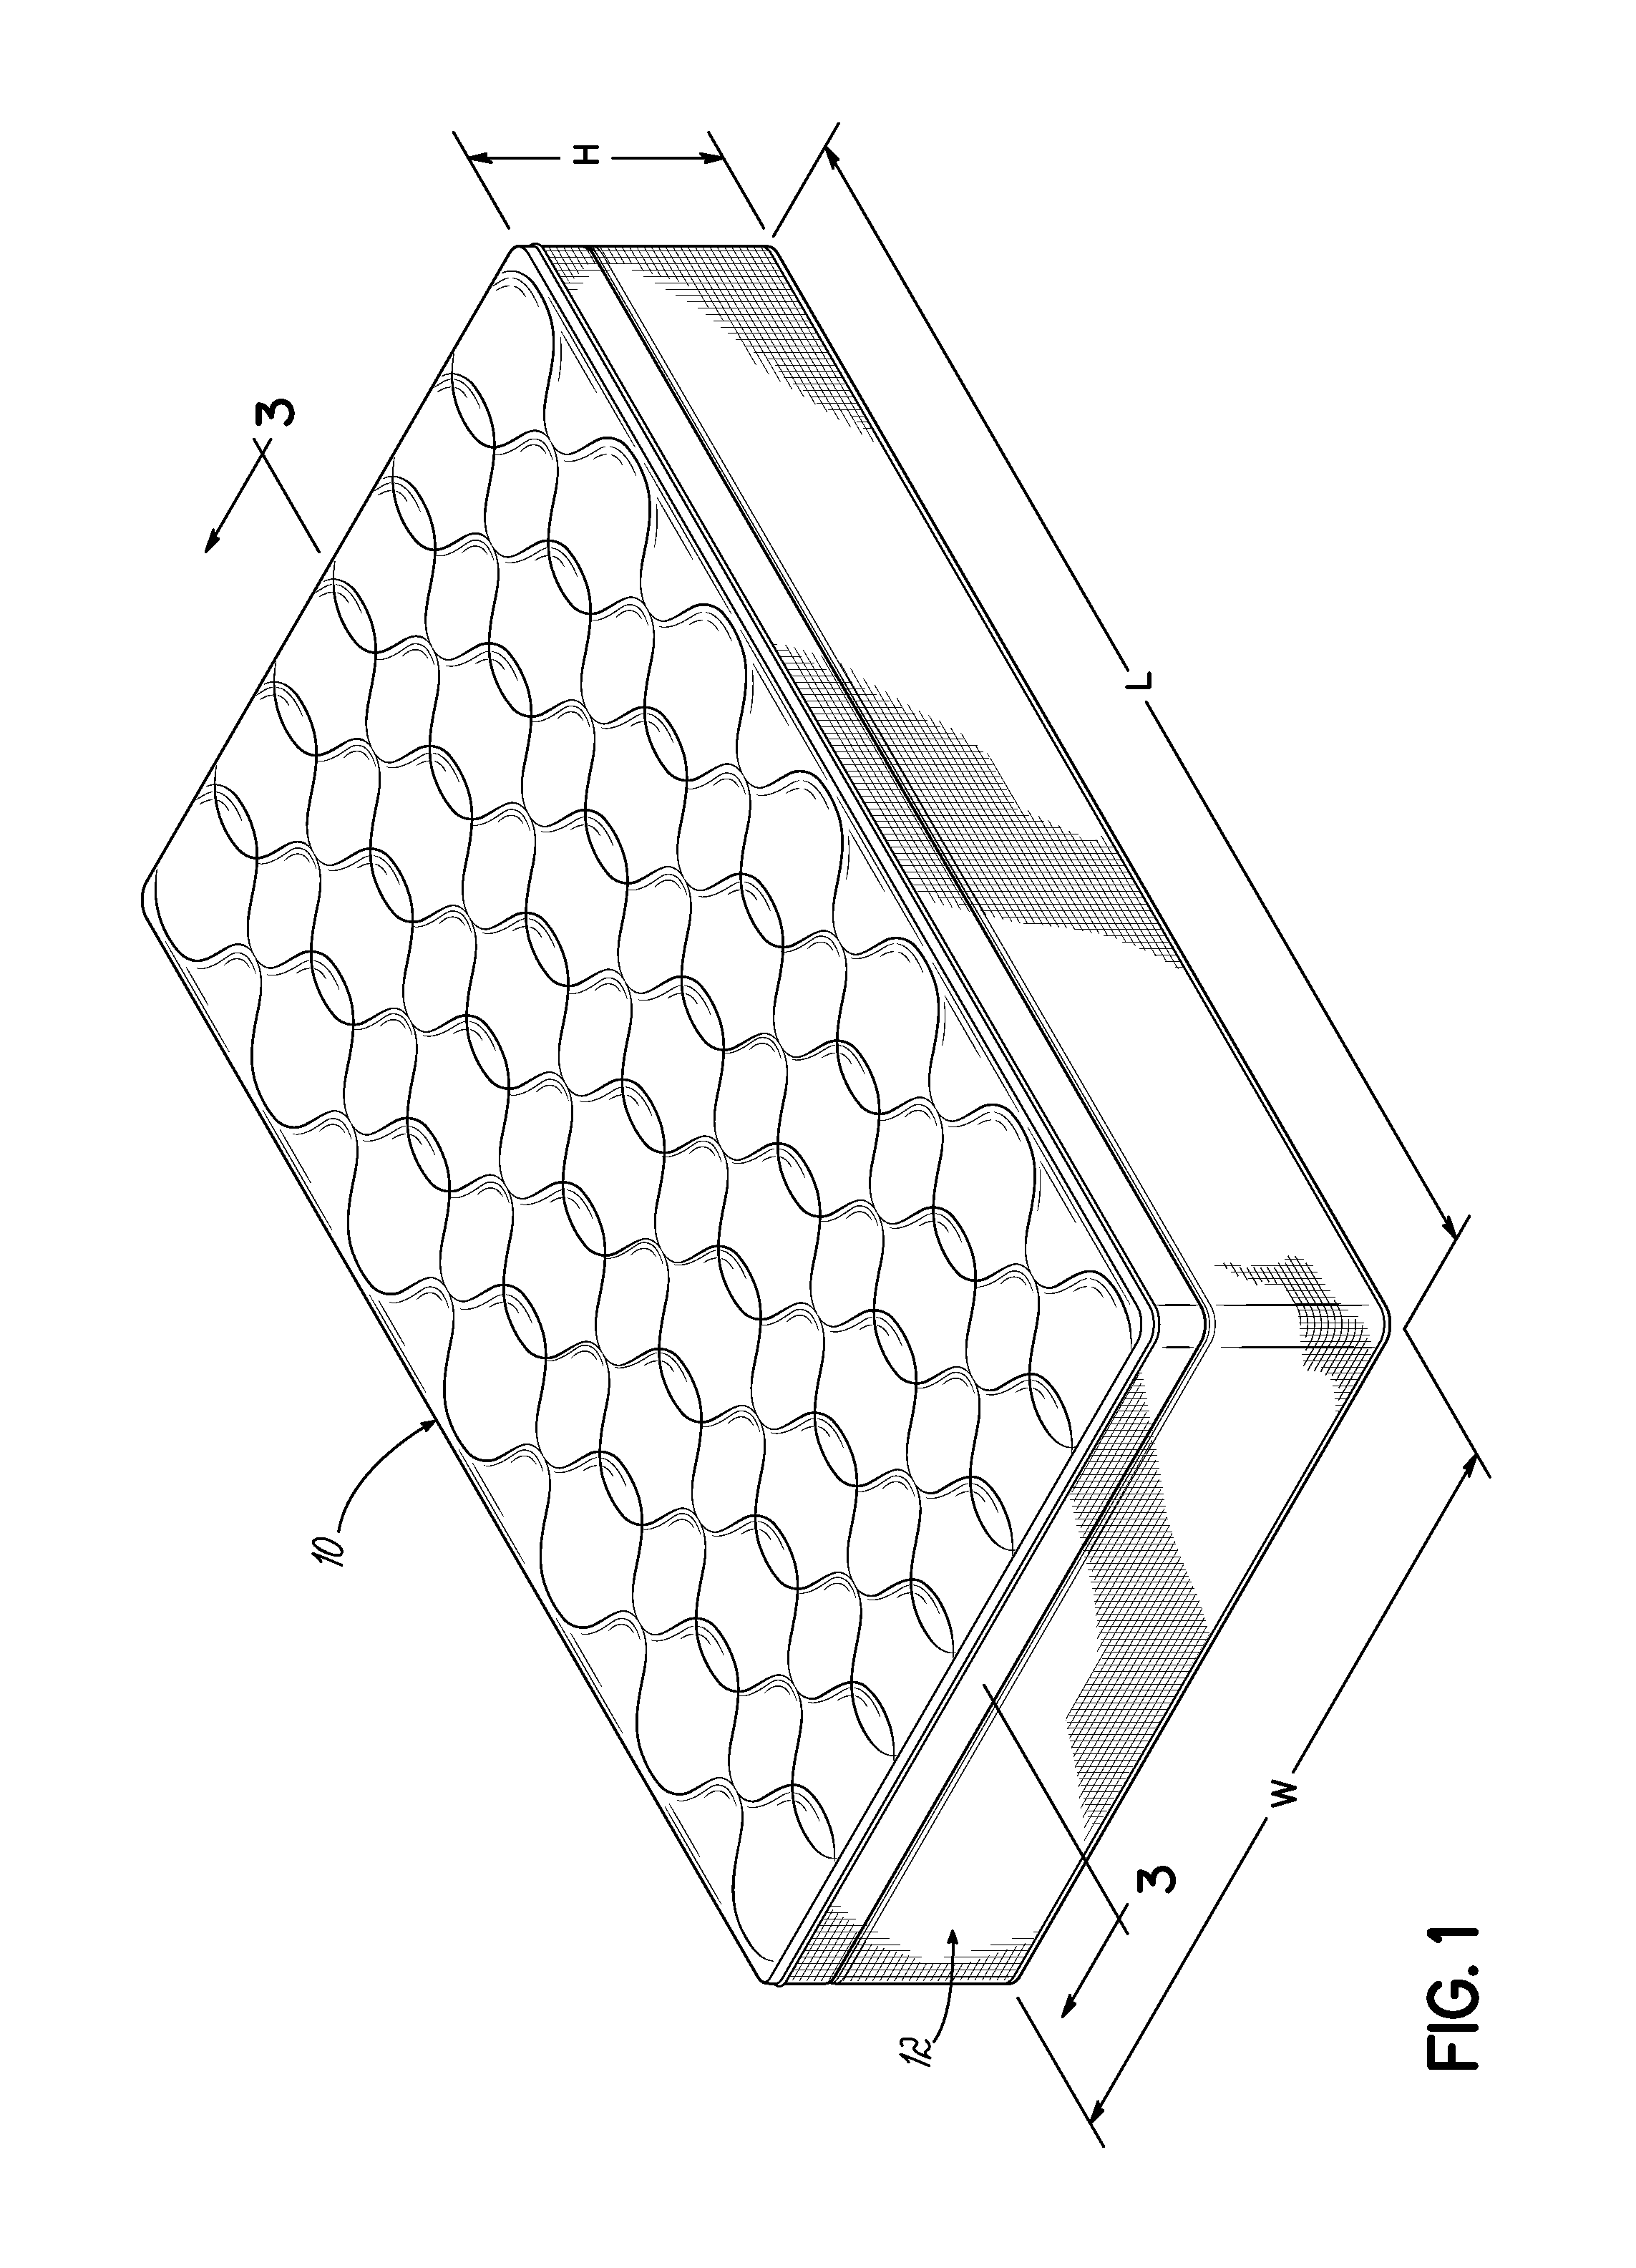 Mattress Topper Comprising Pocketed Spring Assembly With At Least One Cushioning Layer